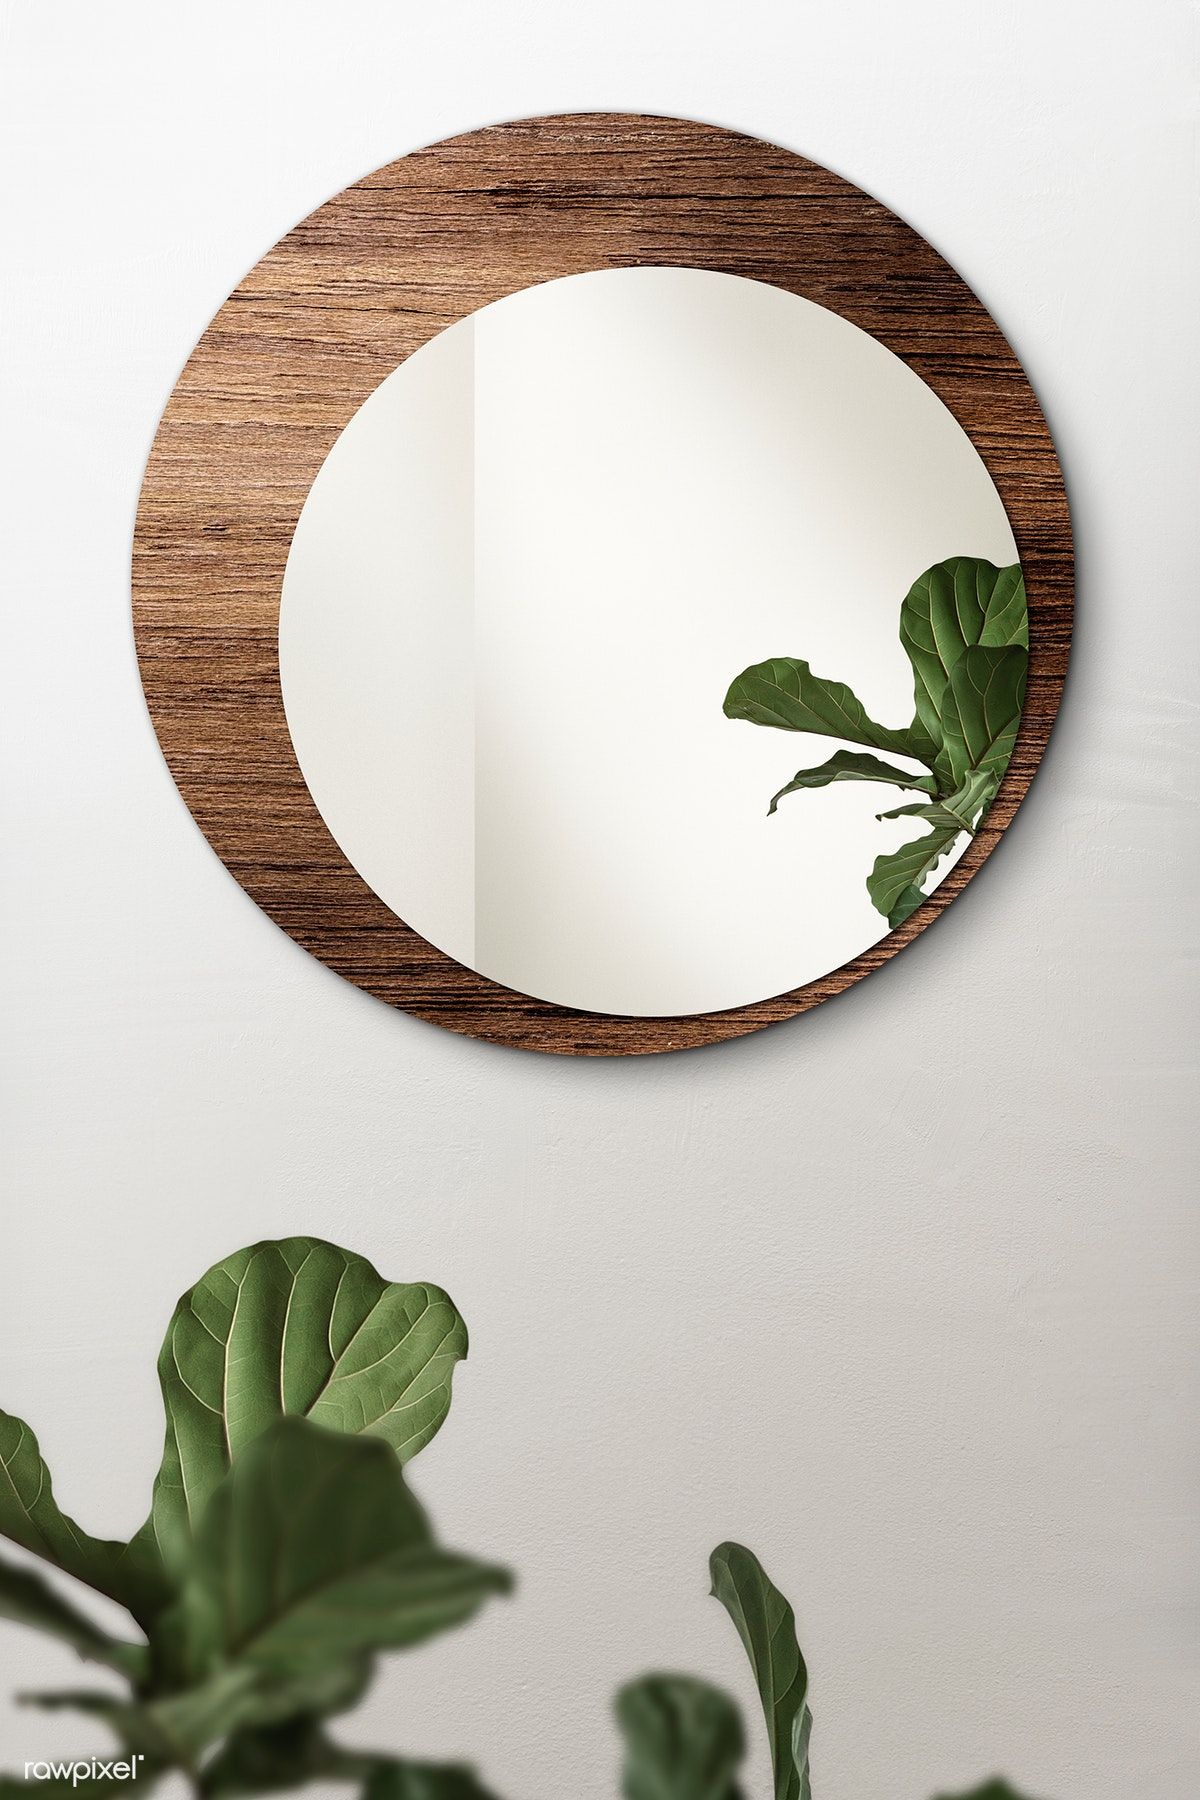 Wooden Mirror Designs: Adding Warmth and Elegance to Your Reflections